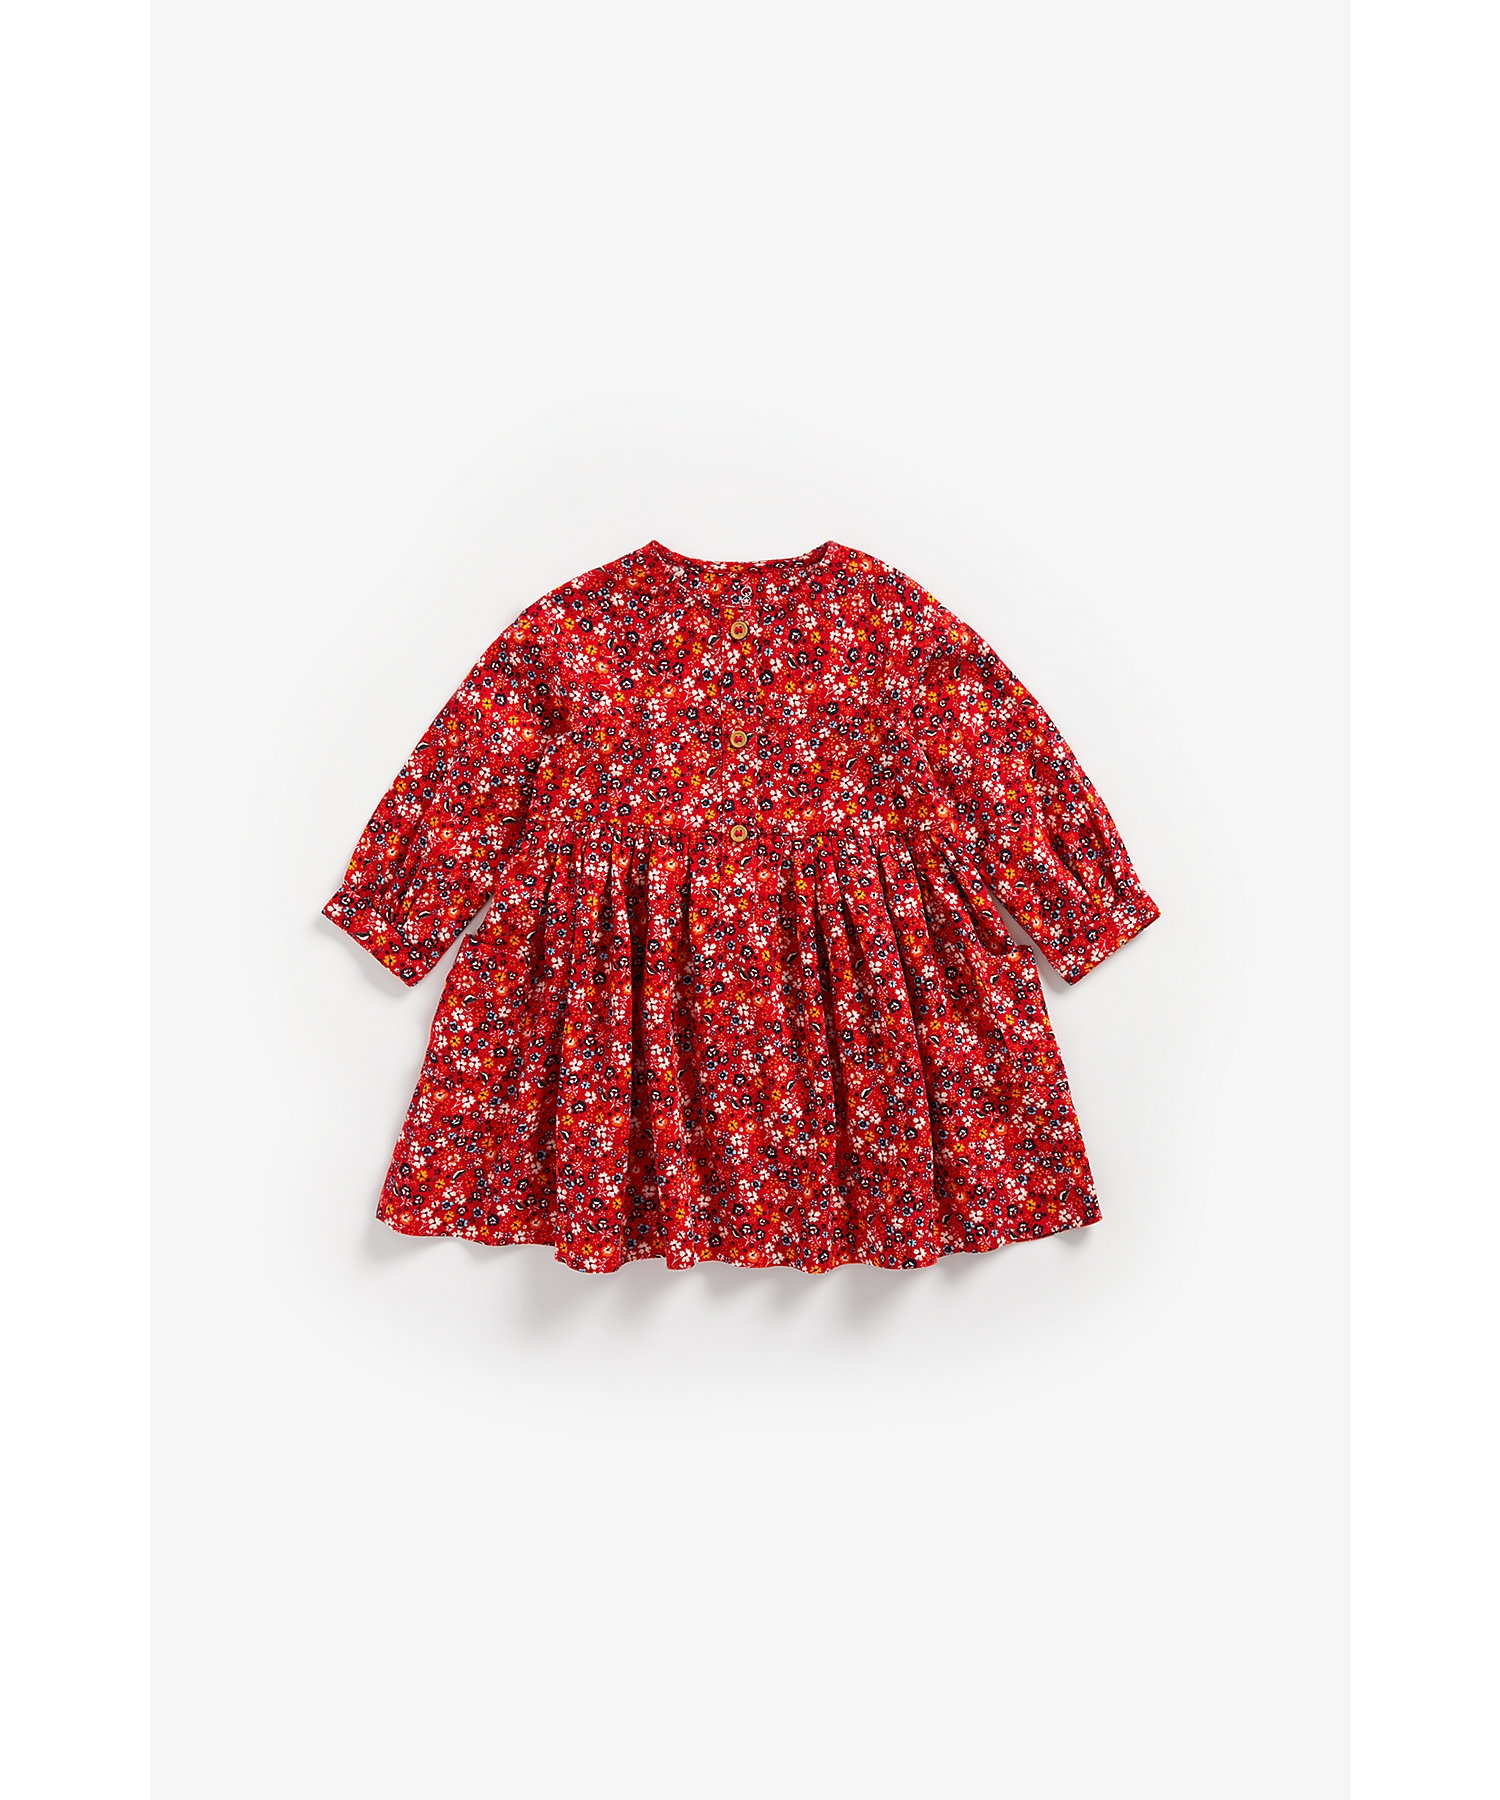 Mothercare | Girls Full Sleeves Dress Floral Print - Red 0